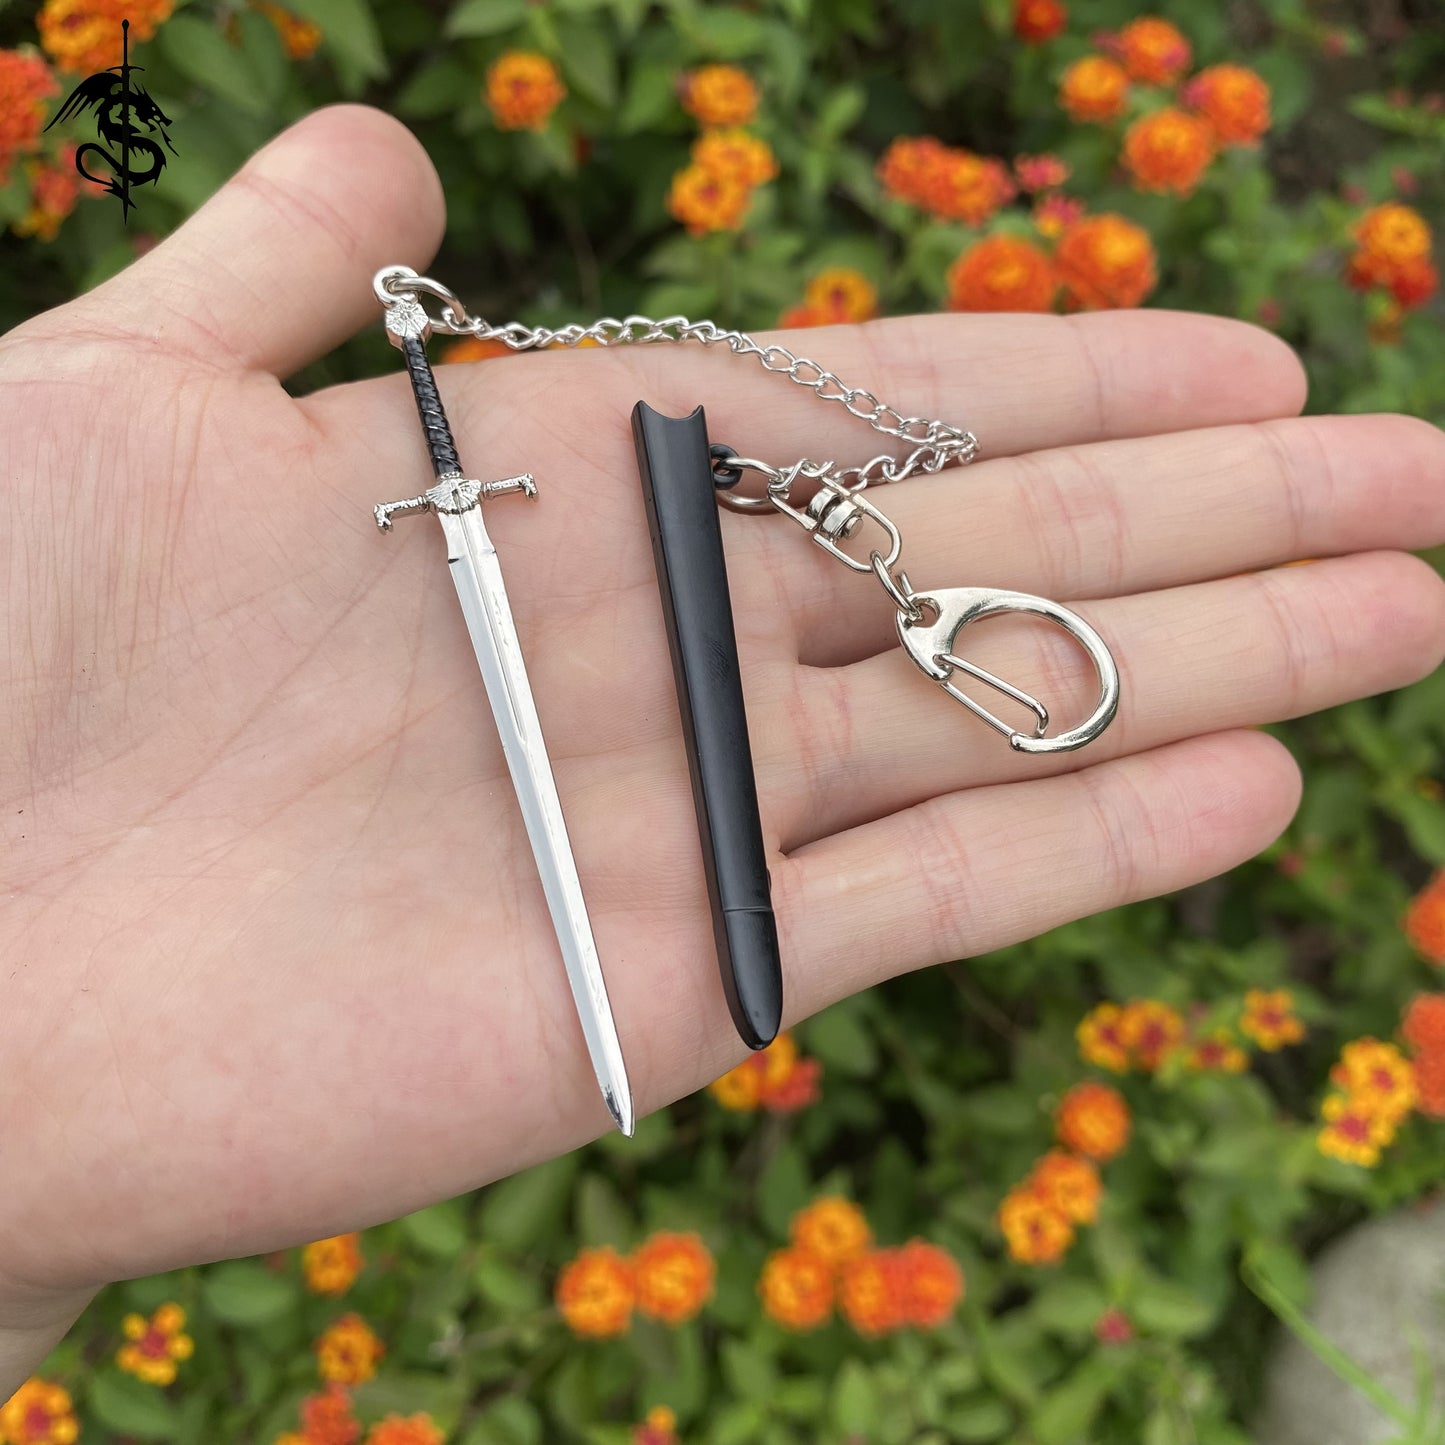 Middle Age Weapon Sword Keychain 5 In 1 Pack